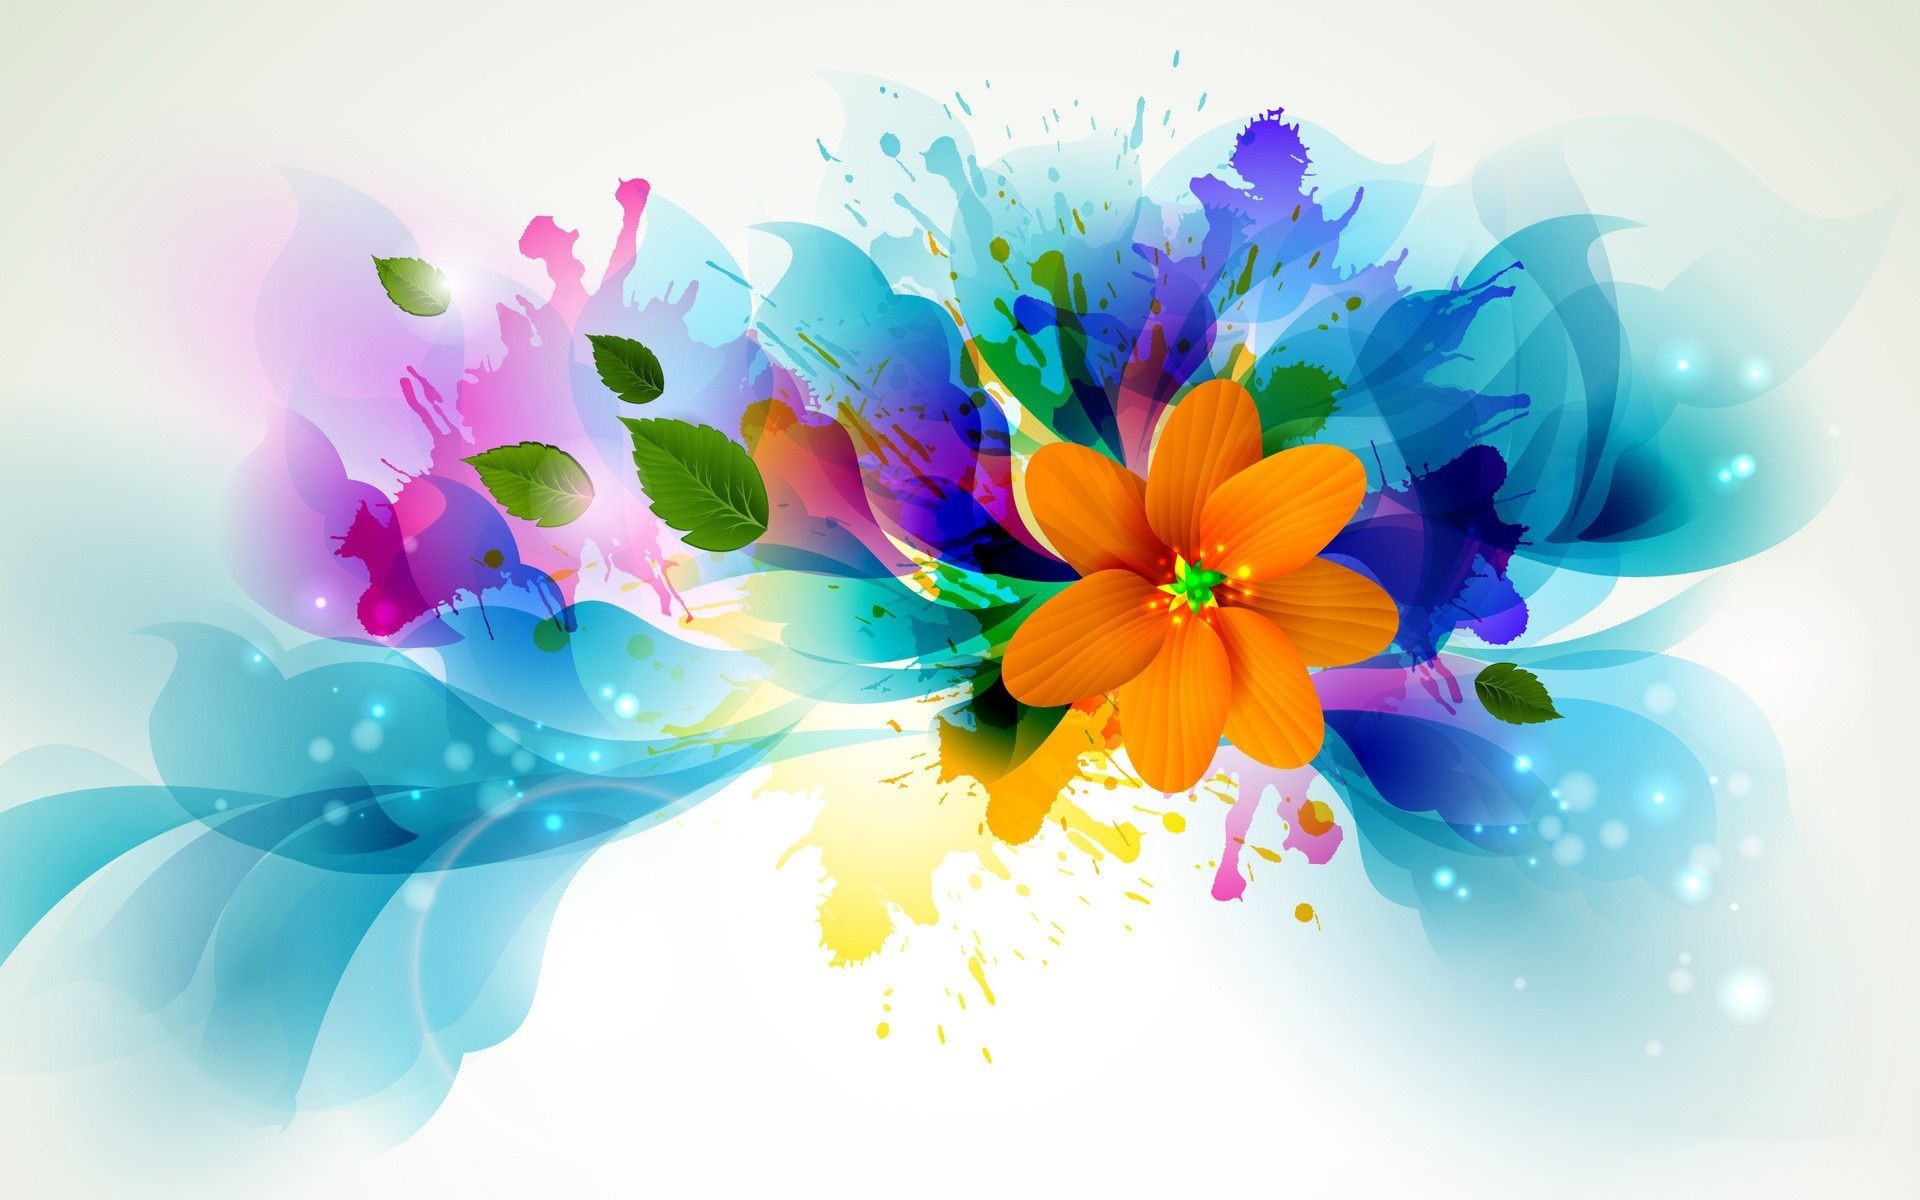 Abstract Flower Art 7051 Hd Wallpapers in Flowers   Imagescicom